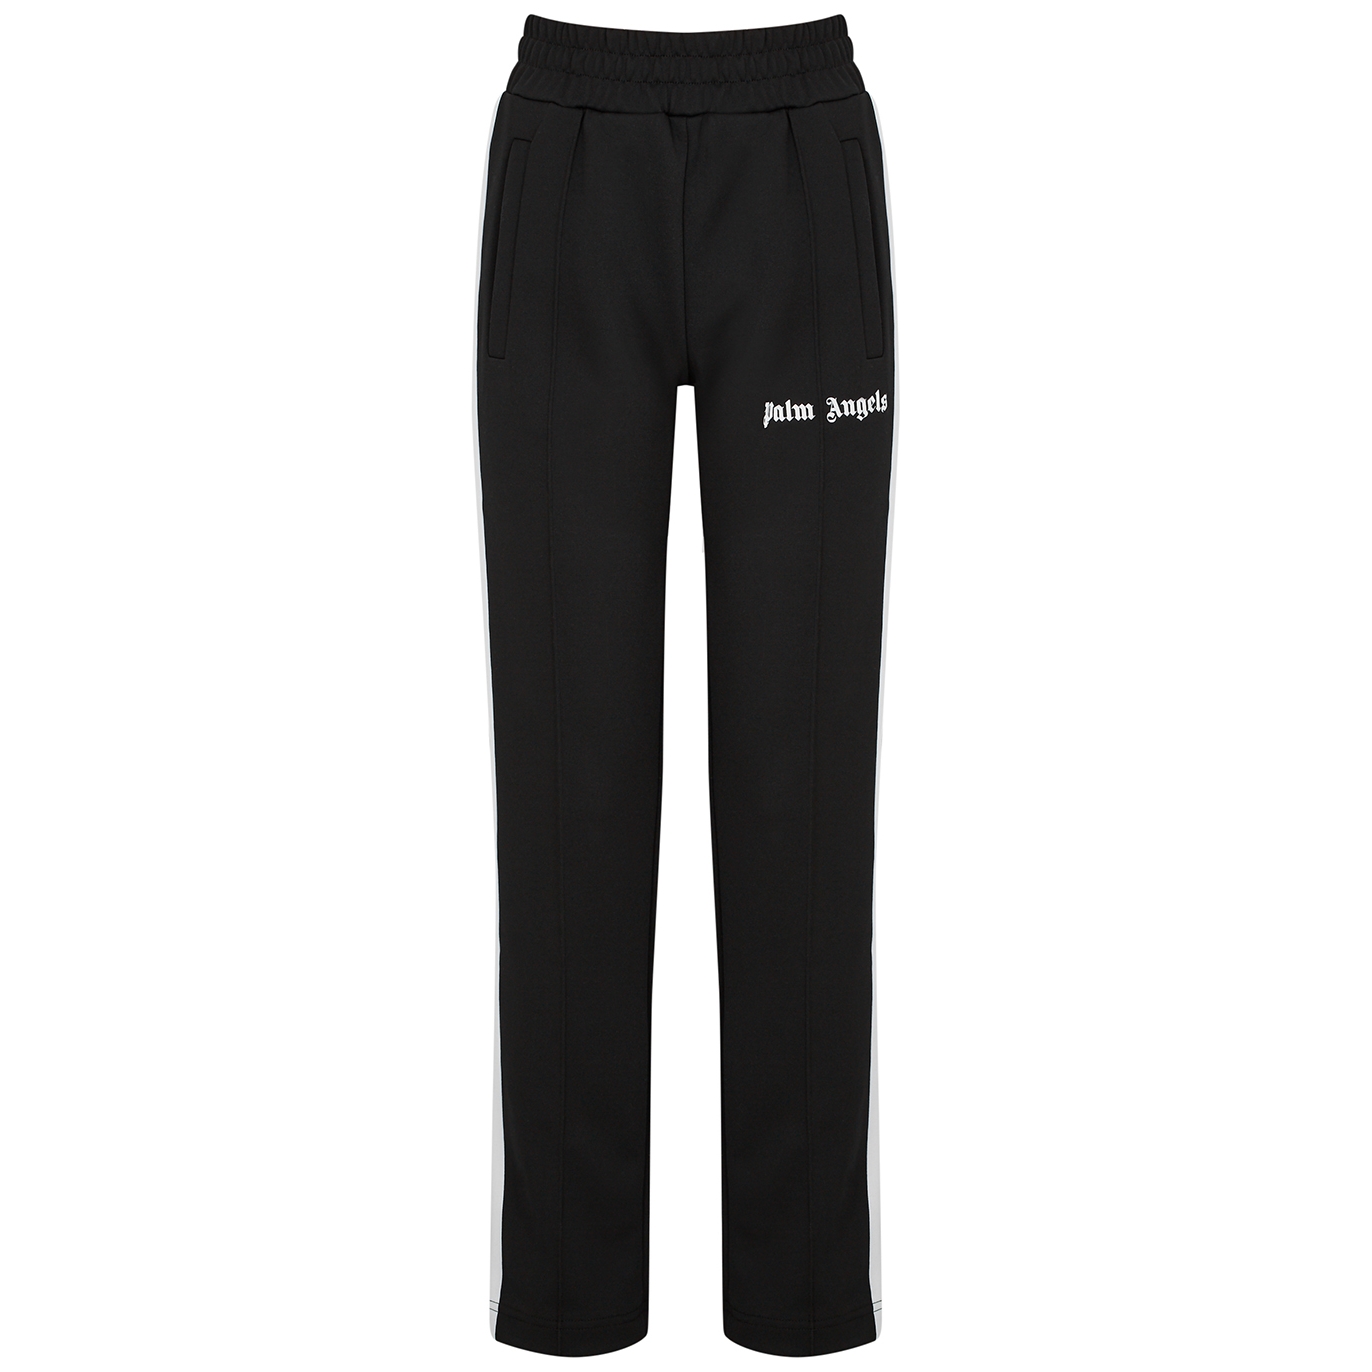 Palm Angels Black Striped Jersey Track Pants - Black And White - S